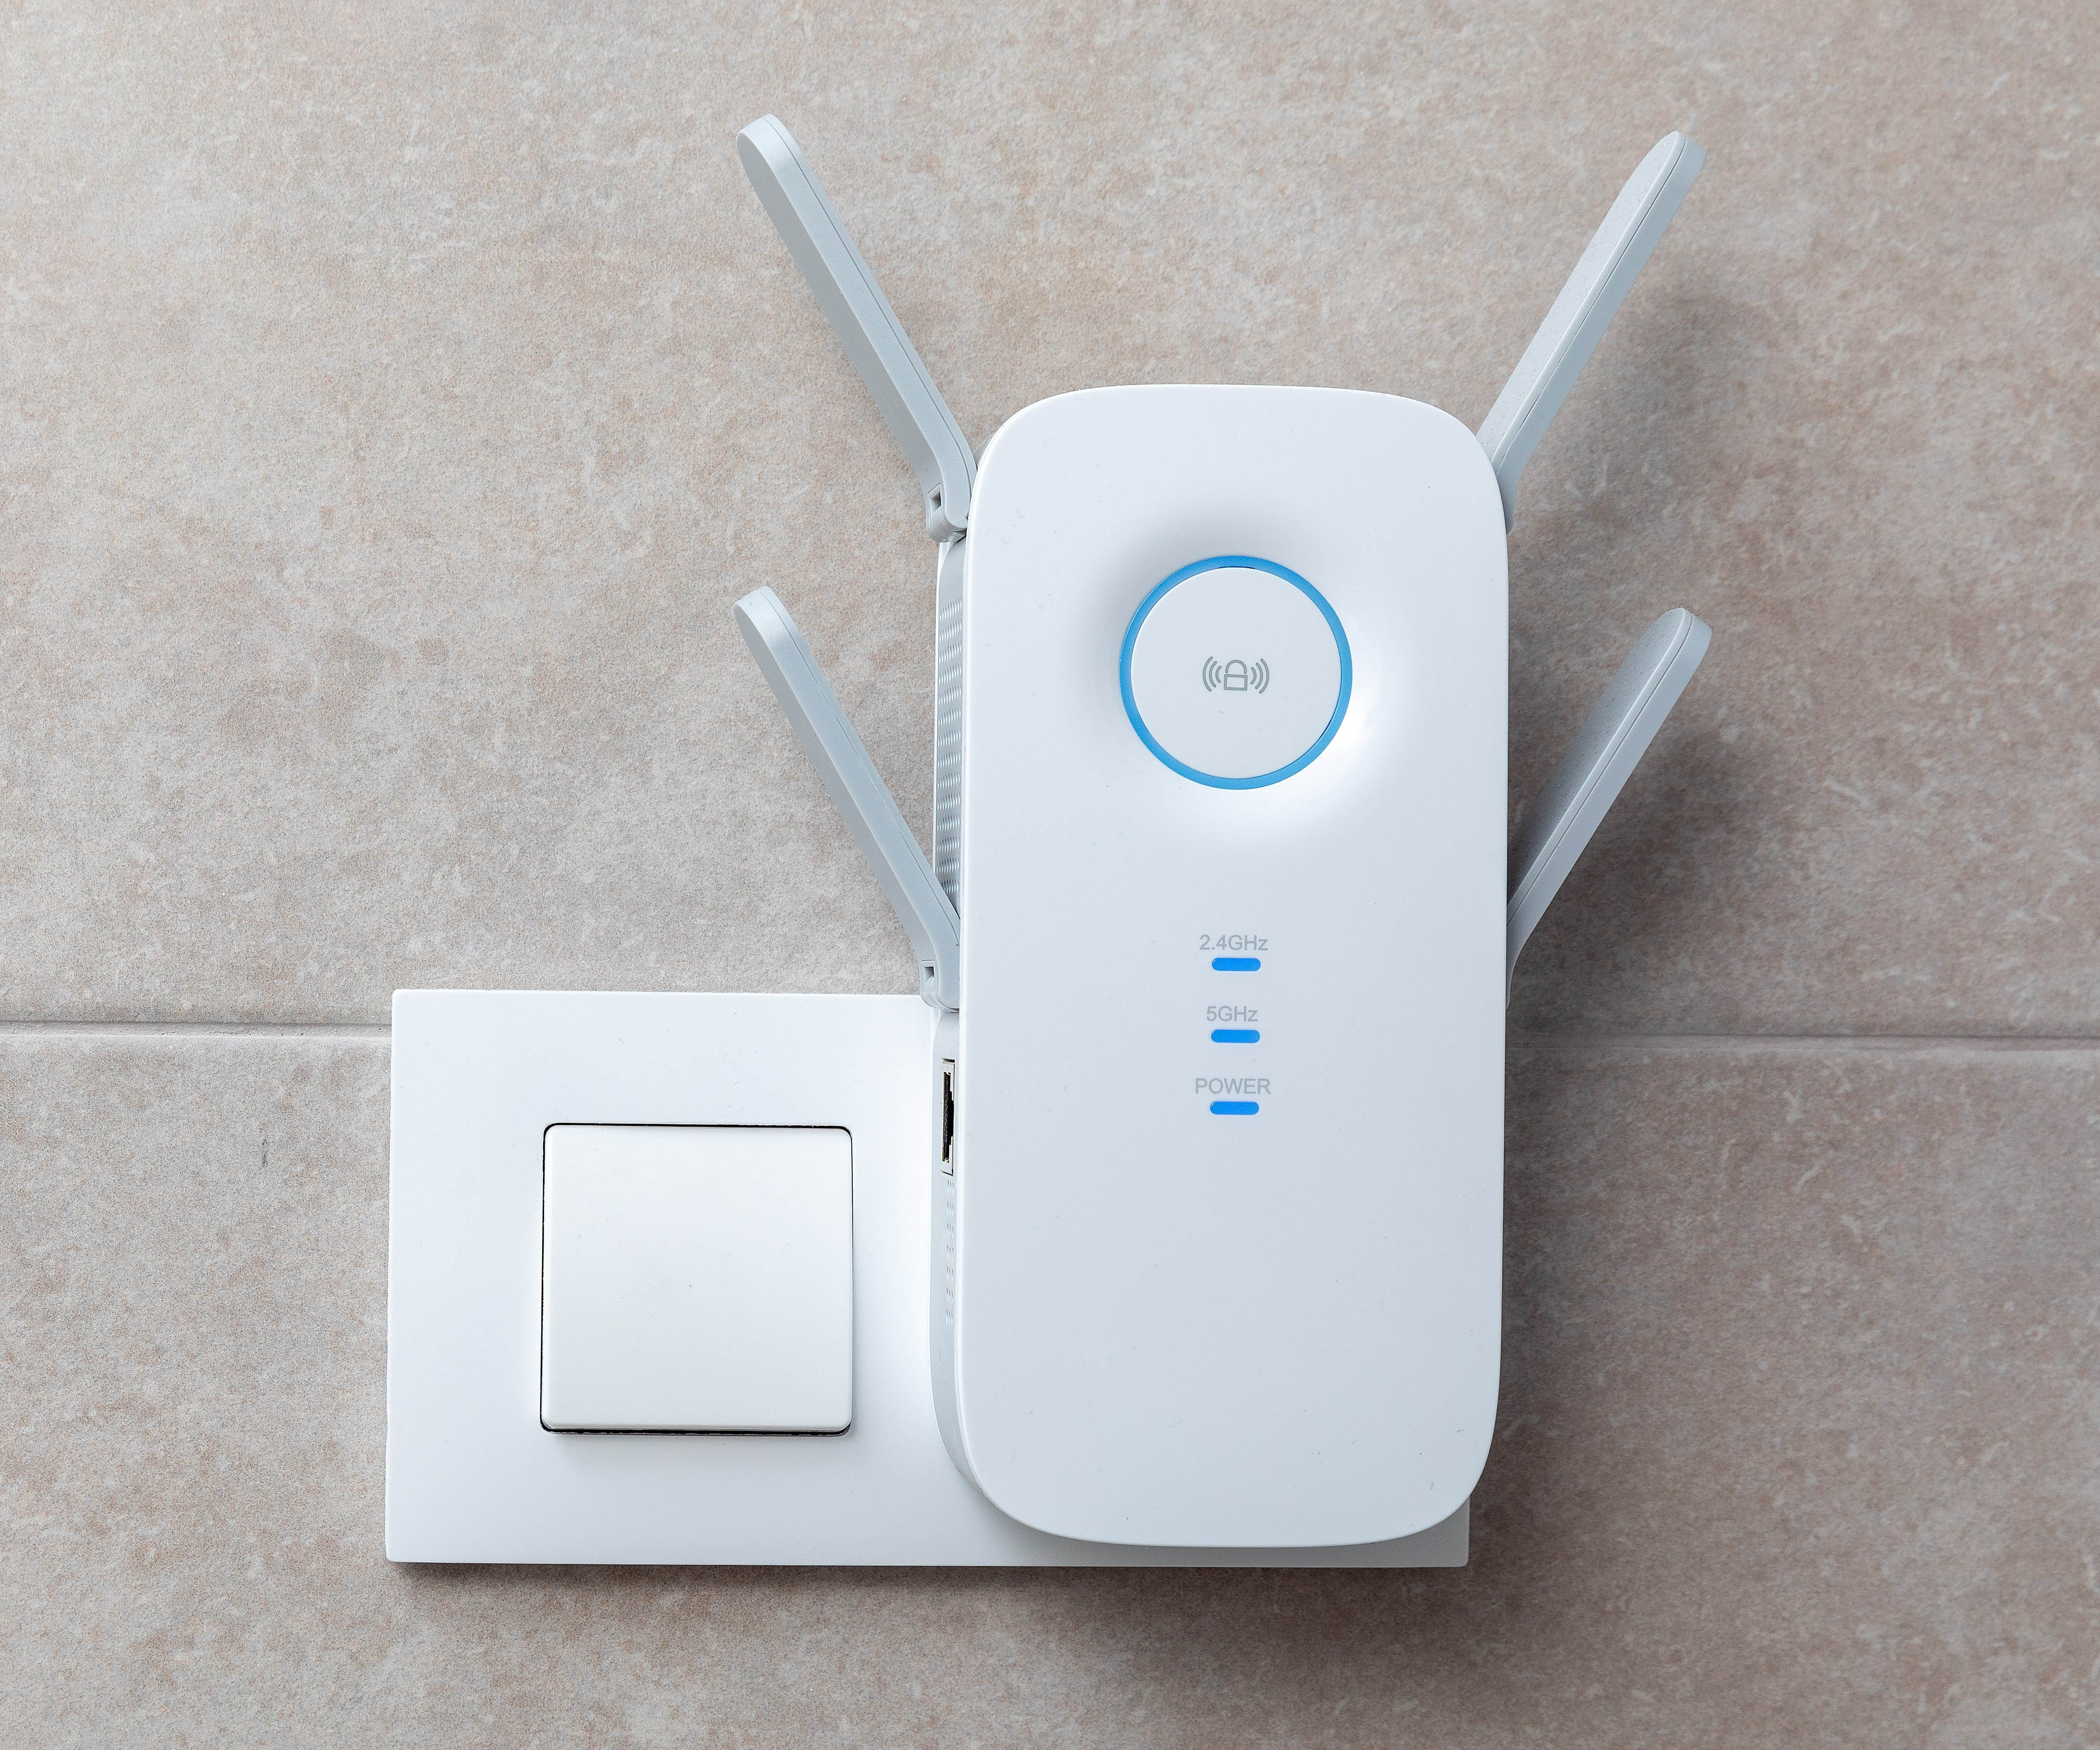 5 Best Home WiFi Boosters to Improve Signal Strength